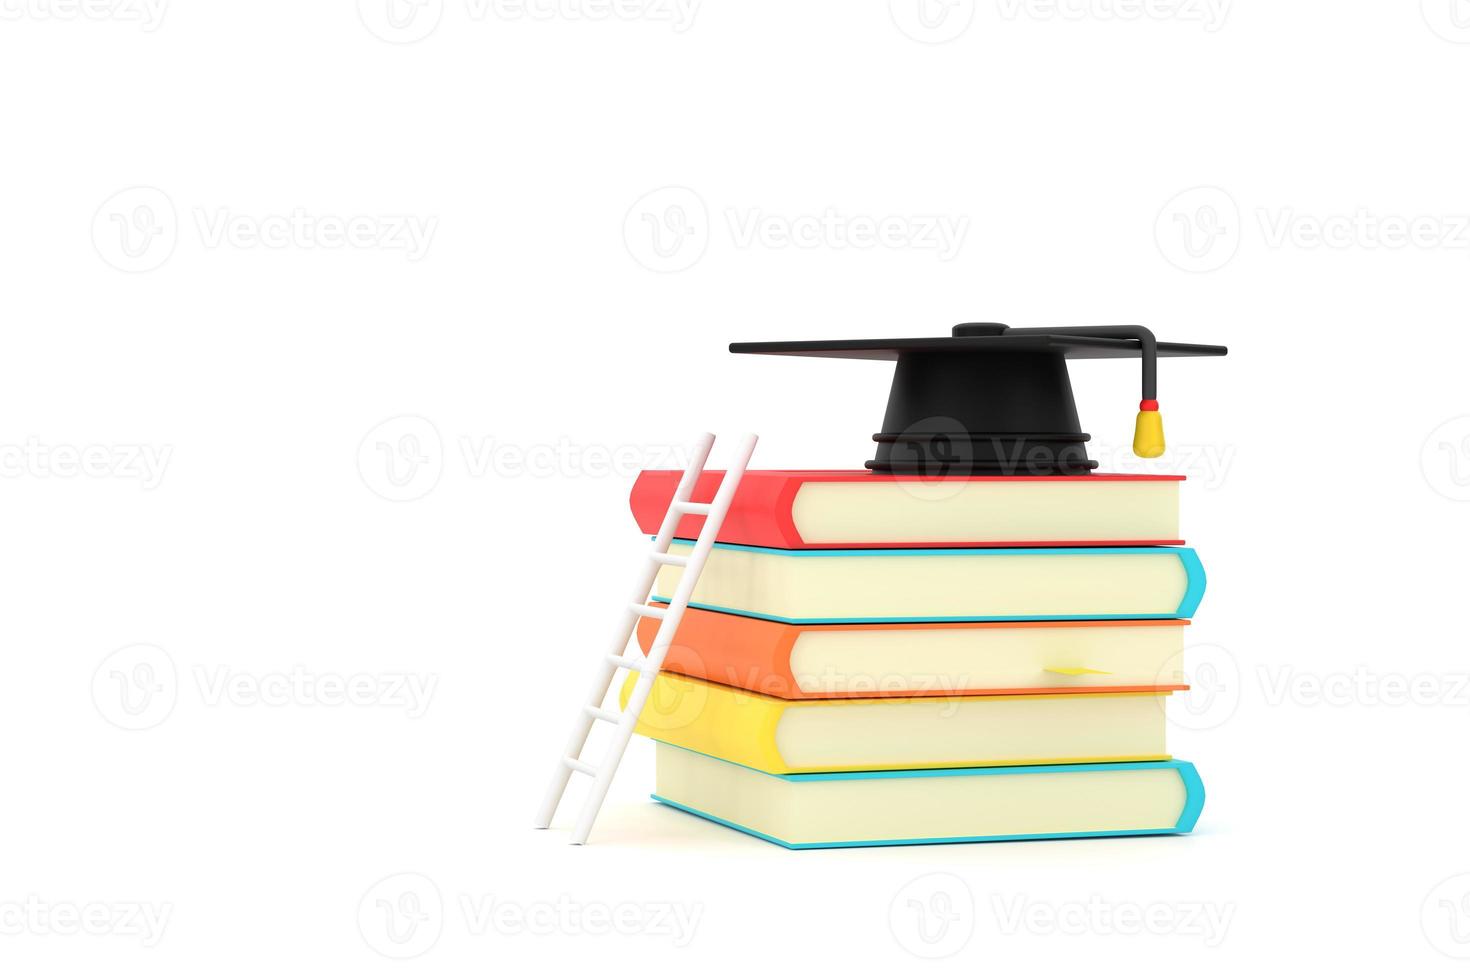 About Education Featuring a Ladder Resting Against a Pile of Books With a Graduation Cap on Top photo